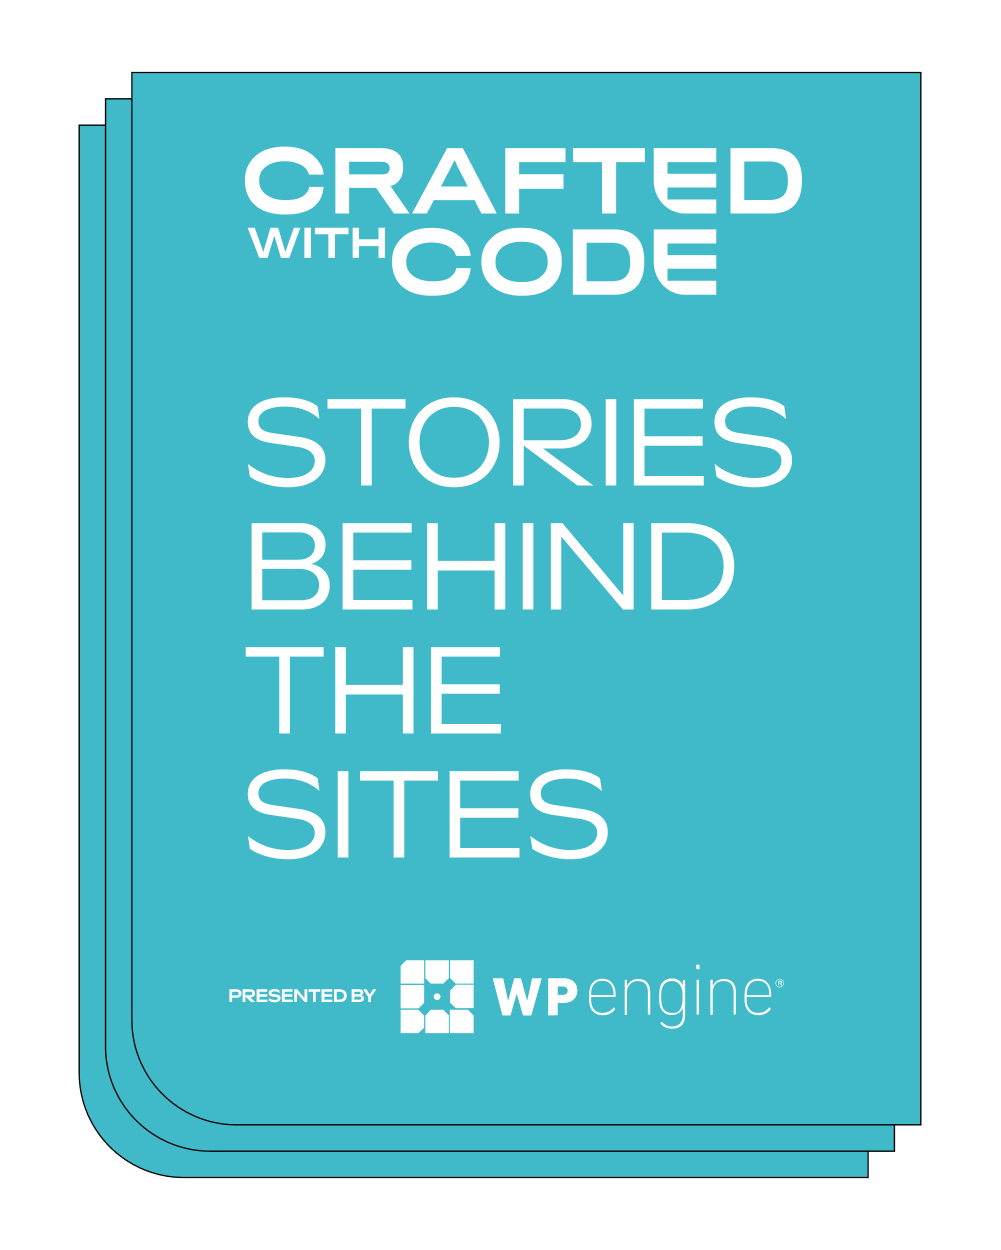 The Stories Behind the Sites